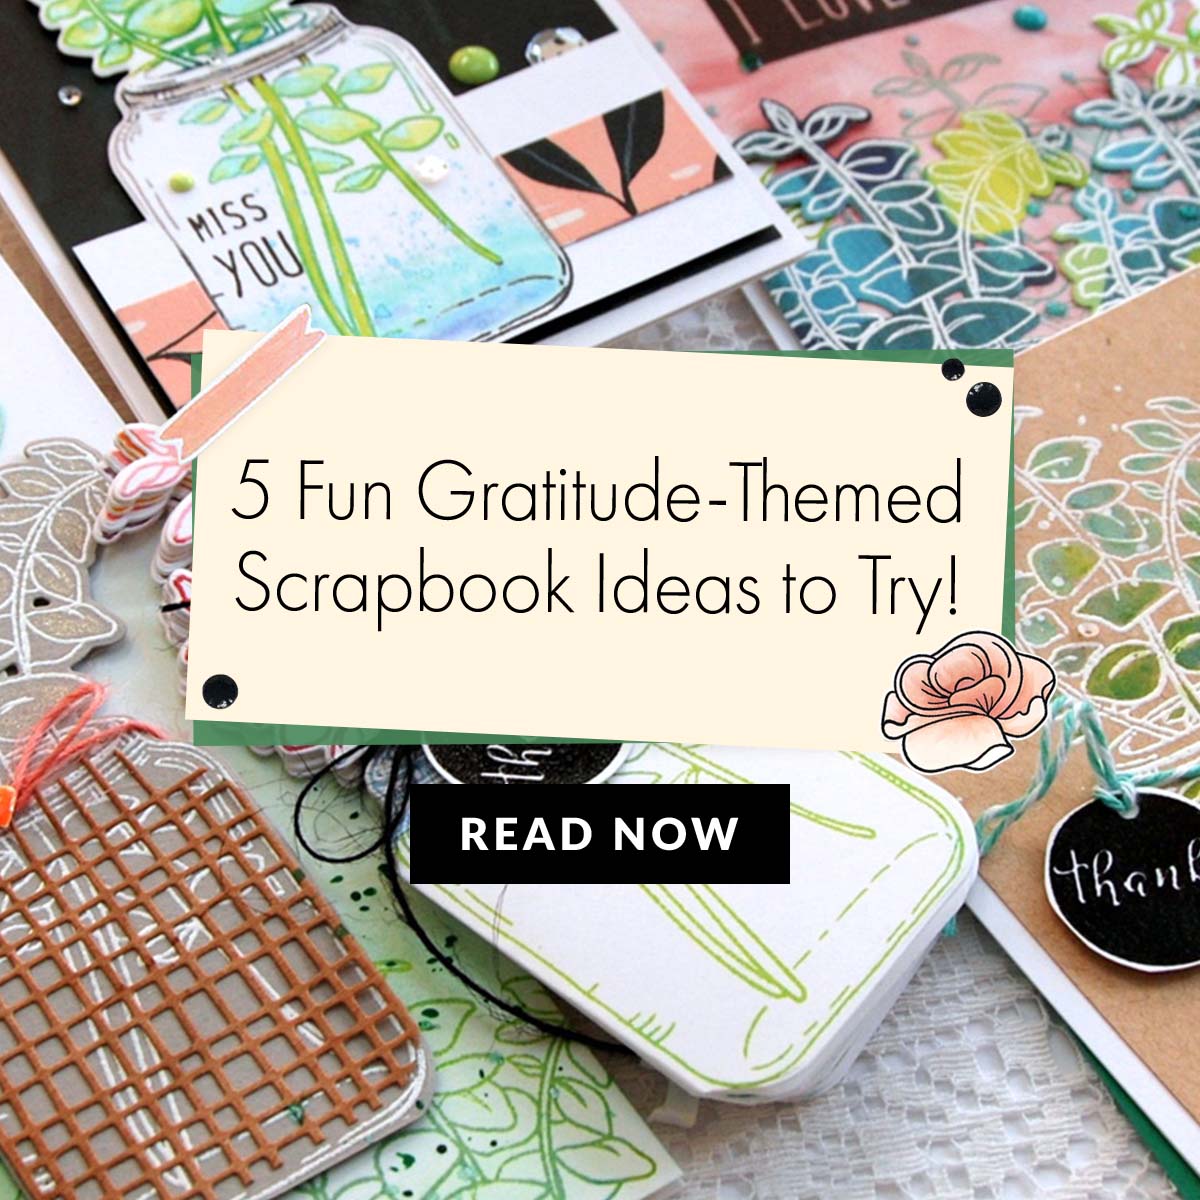 5 Gratitude-Inspired Scrapbooking Layouts to Try!